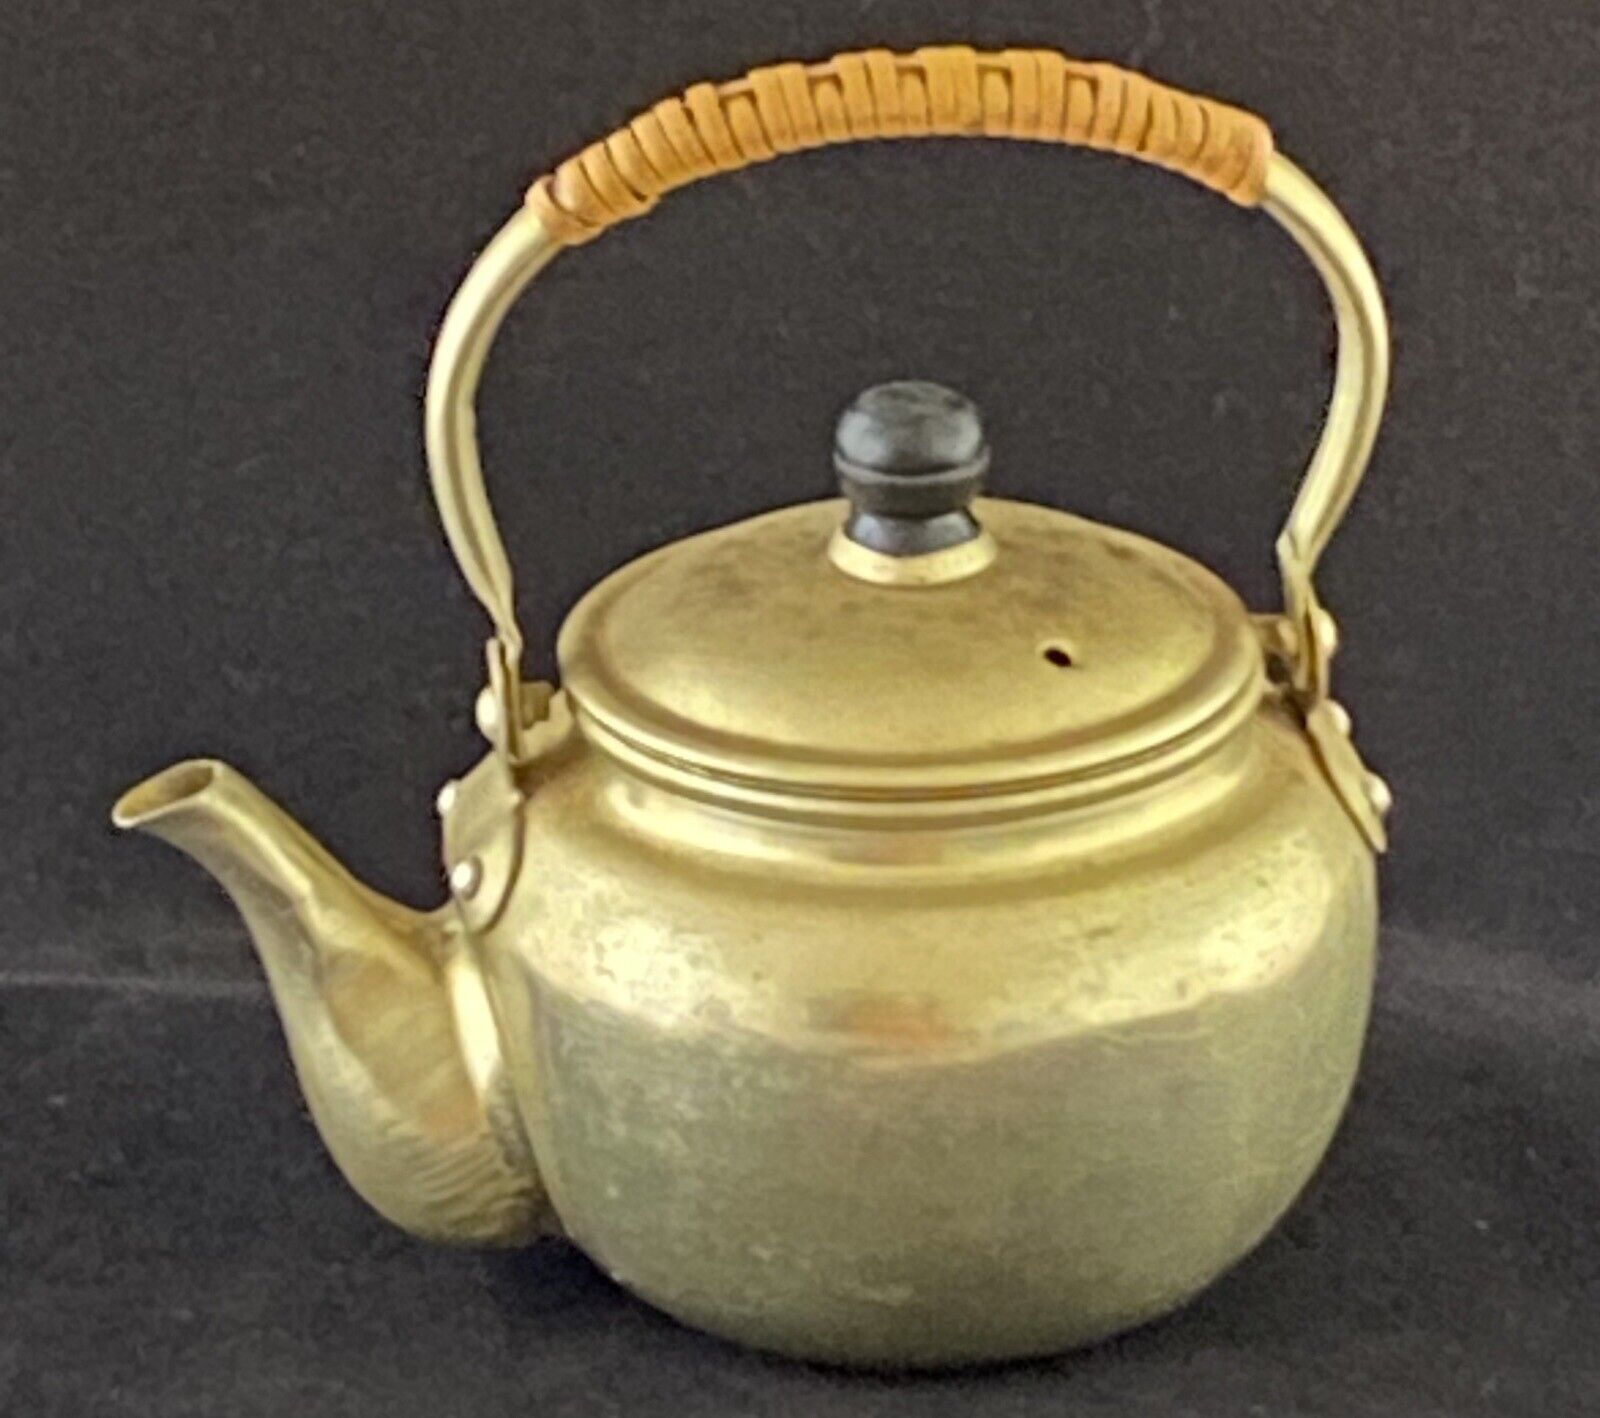 Authentic 1950’s Small Japanese Anodized Aluminum Teapot W Strainer Infuser